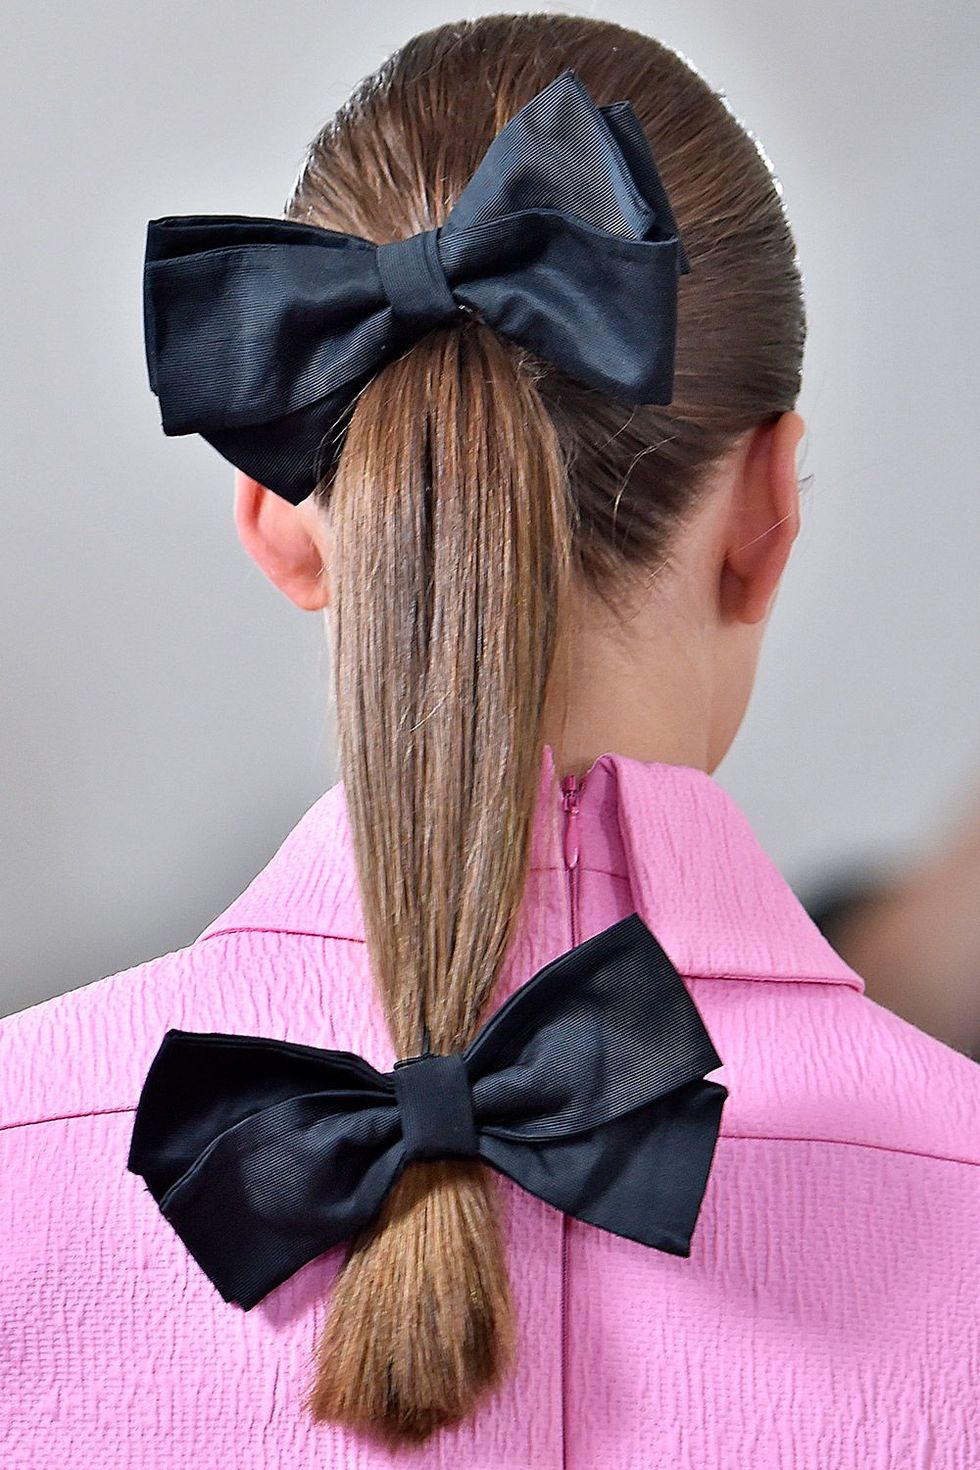 Spring/summer 2019 hair trends, catwalk hair trends, hairstyles for SS19